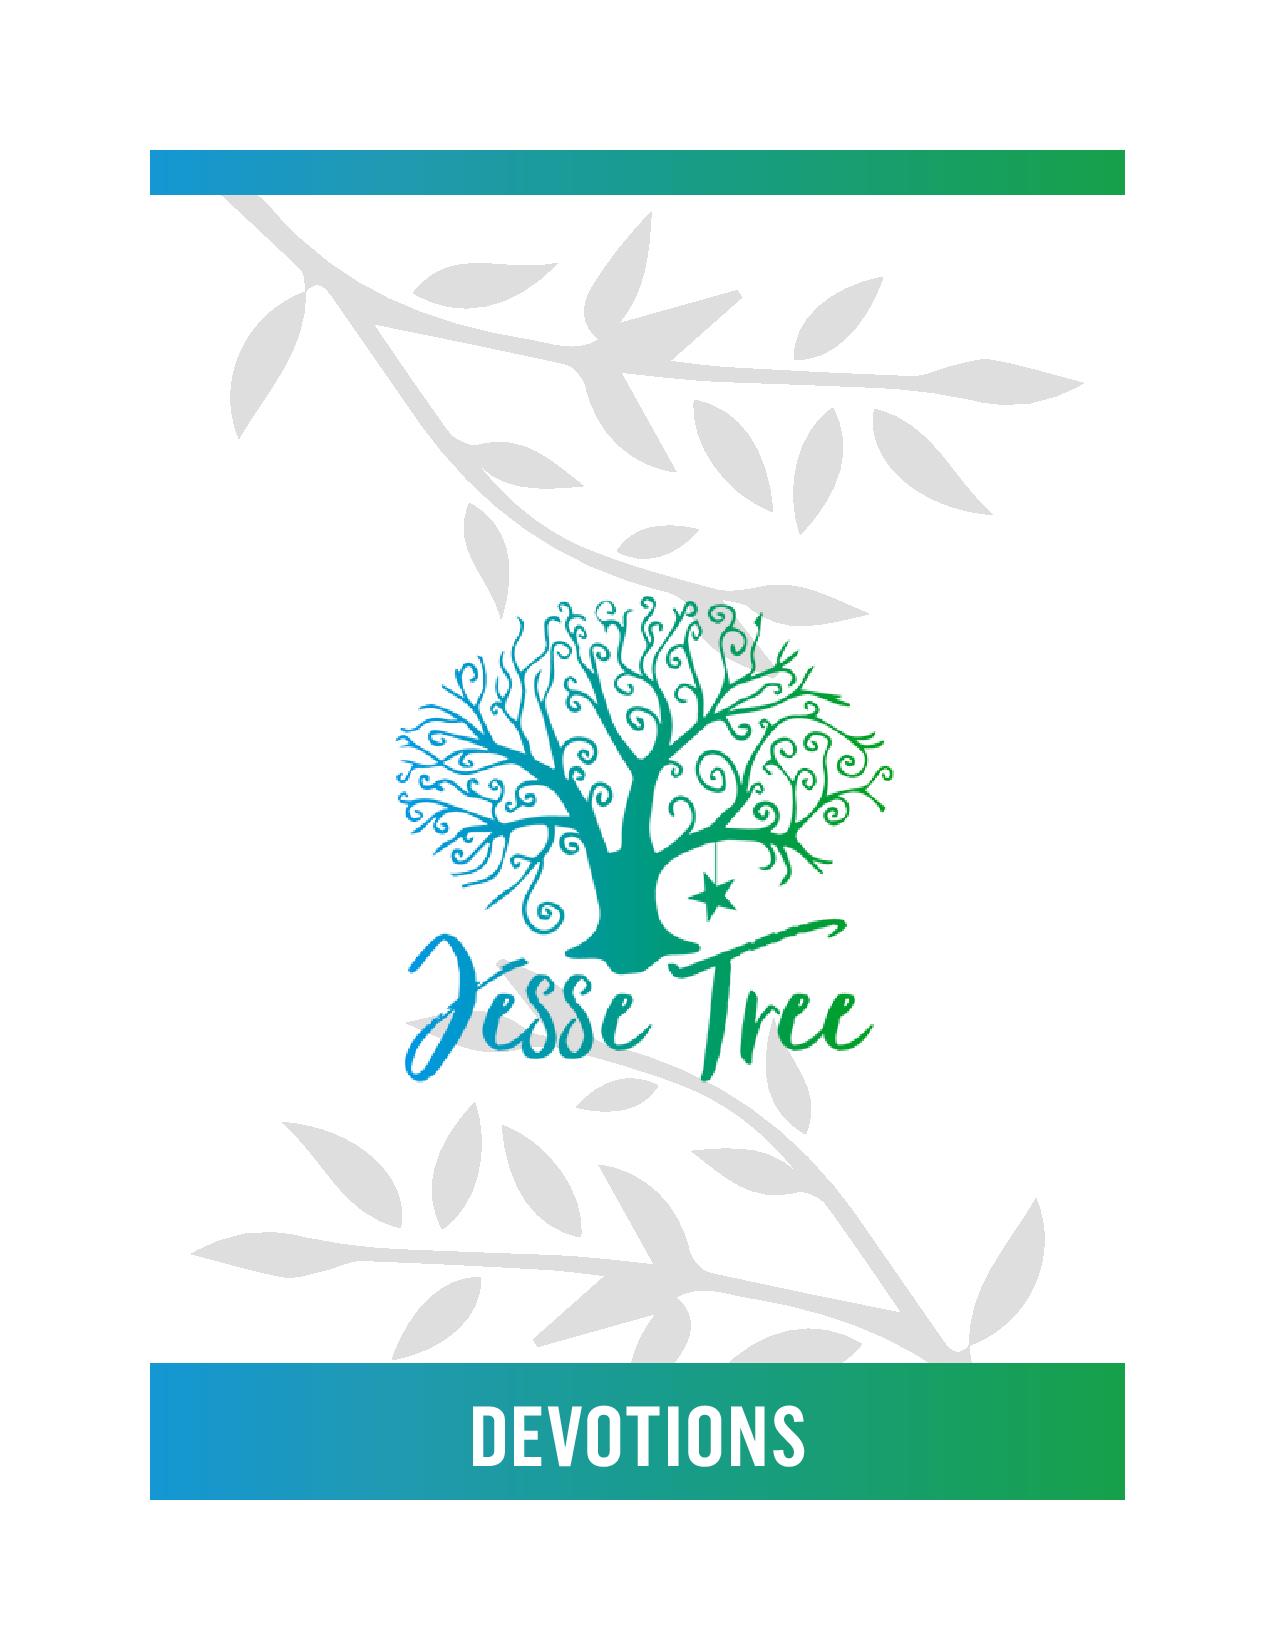 Jesse Tree personal devotions cover